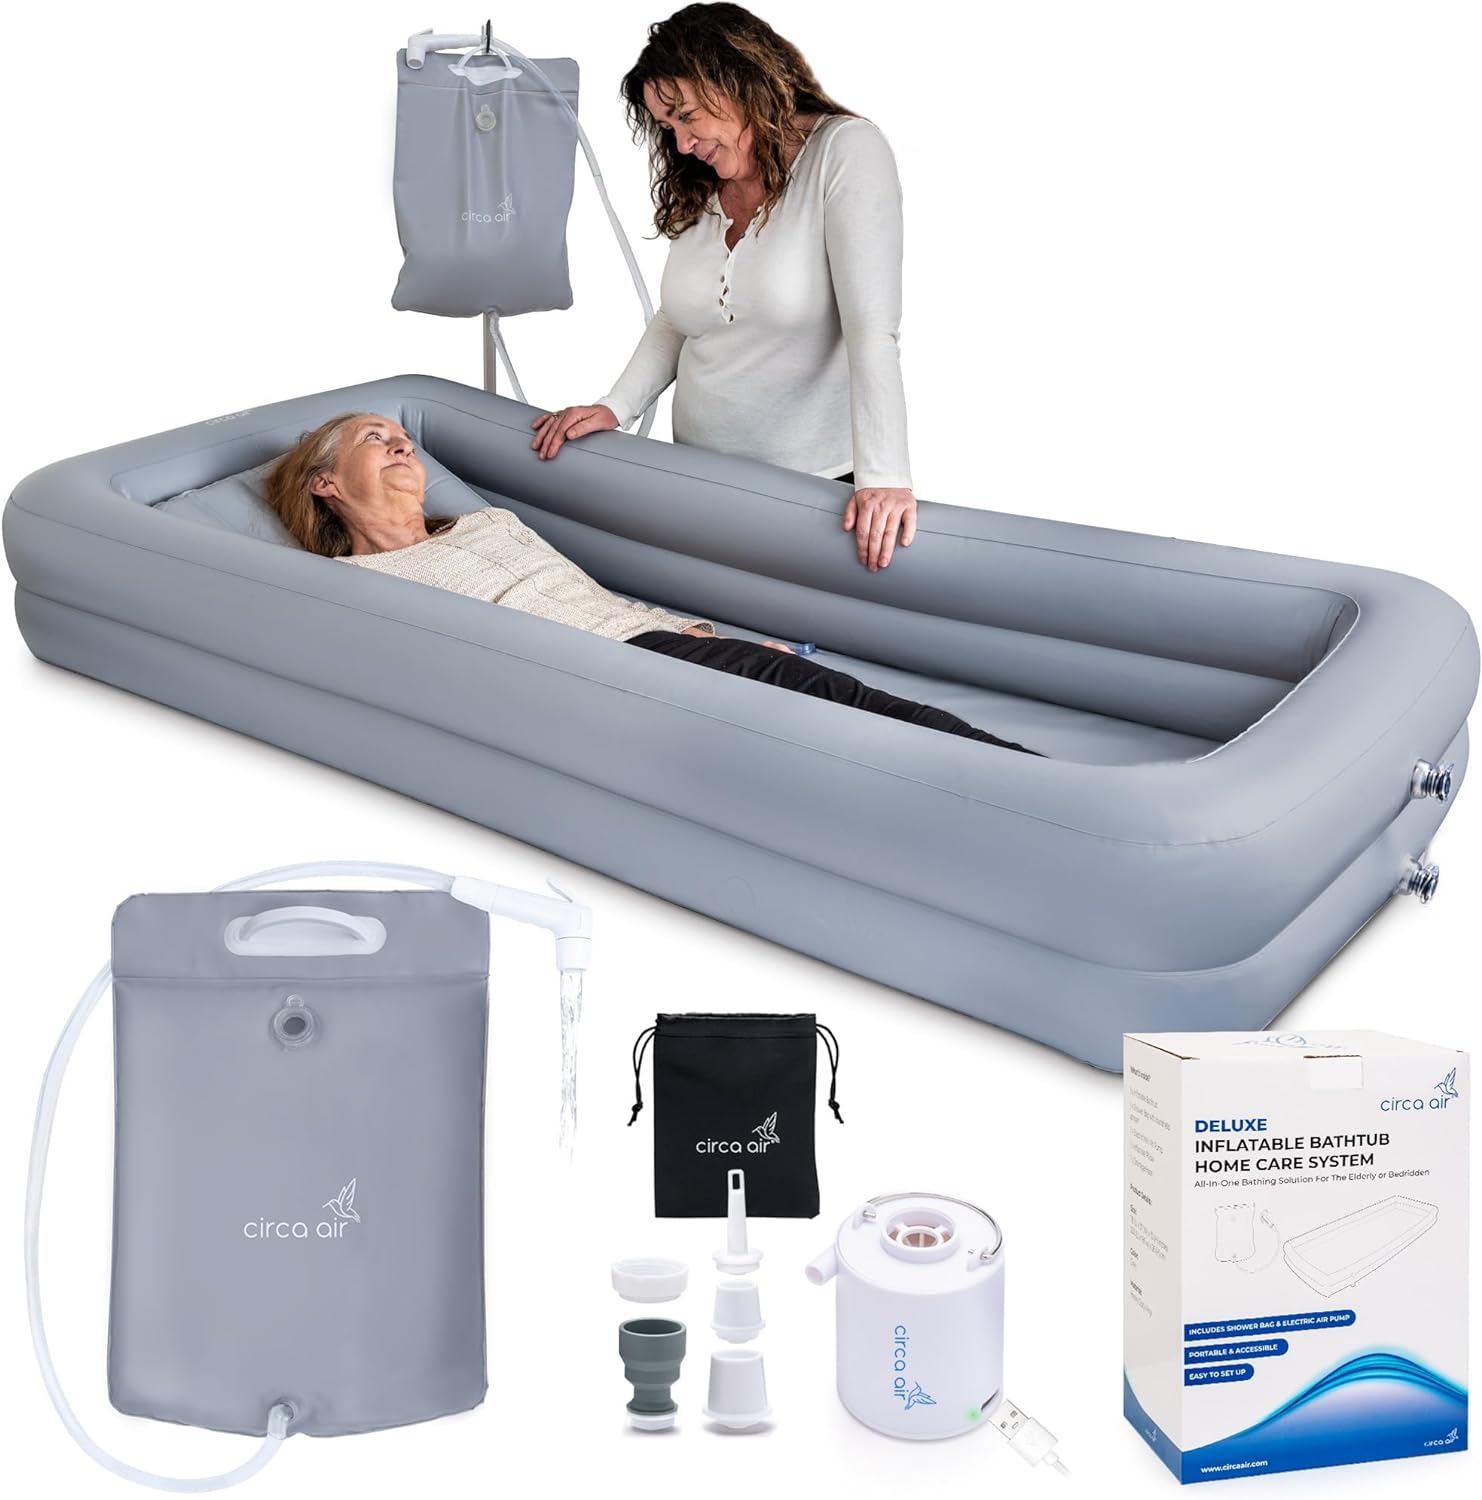 As a caregiver, the Circa Air Inflatable Bathtub has lightened the load. The electric air pump makes setup a breeze, saving my hands and time. The drainage hose is so flexible and efficient. It' not just a bathtub, it' a complete solution for preserving dignity and well-being. Our family member feels pampered, and I feel less physically strained. A true caregiver' ally!